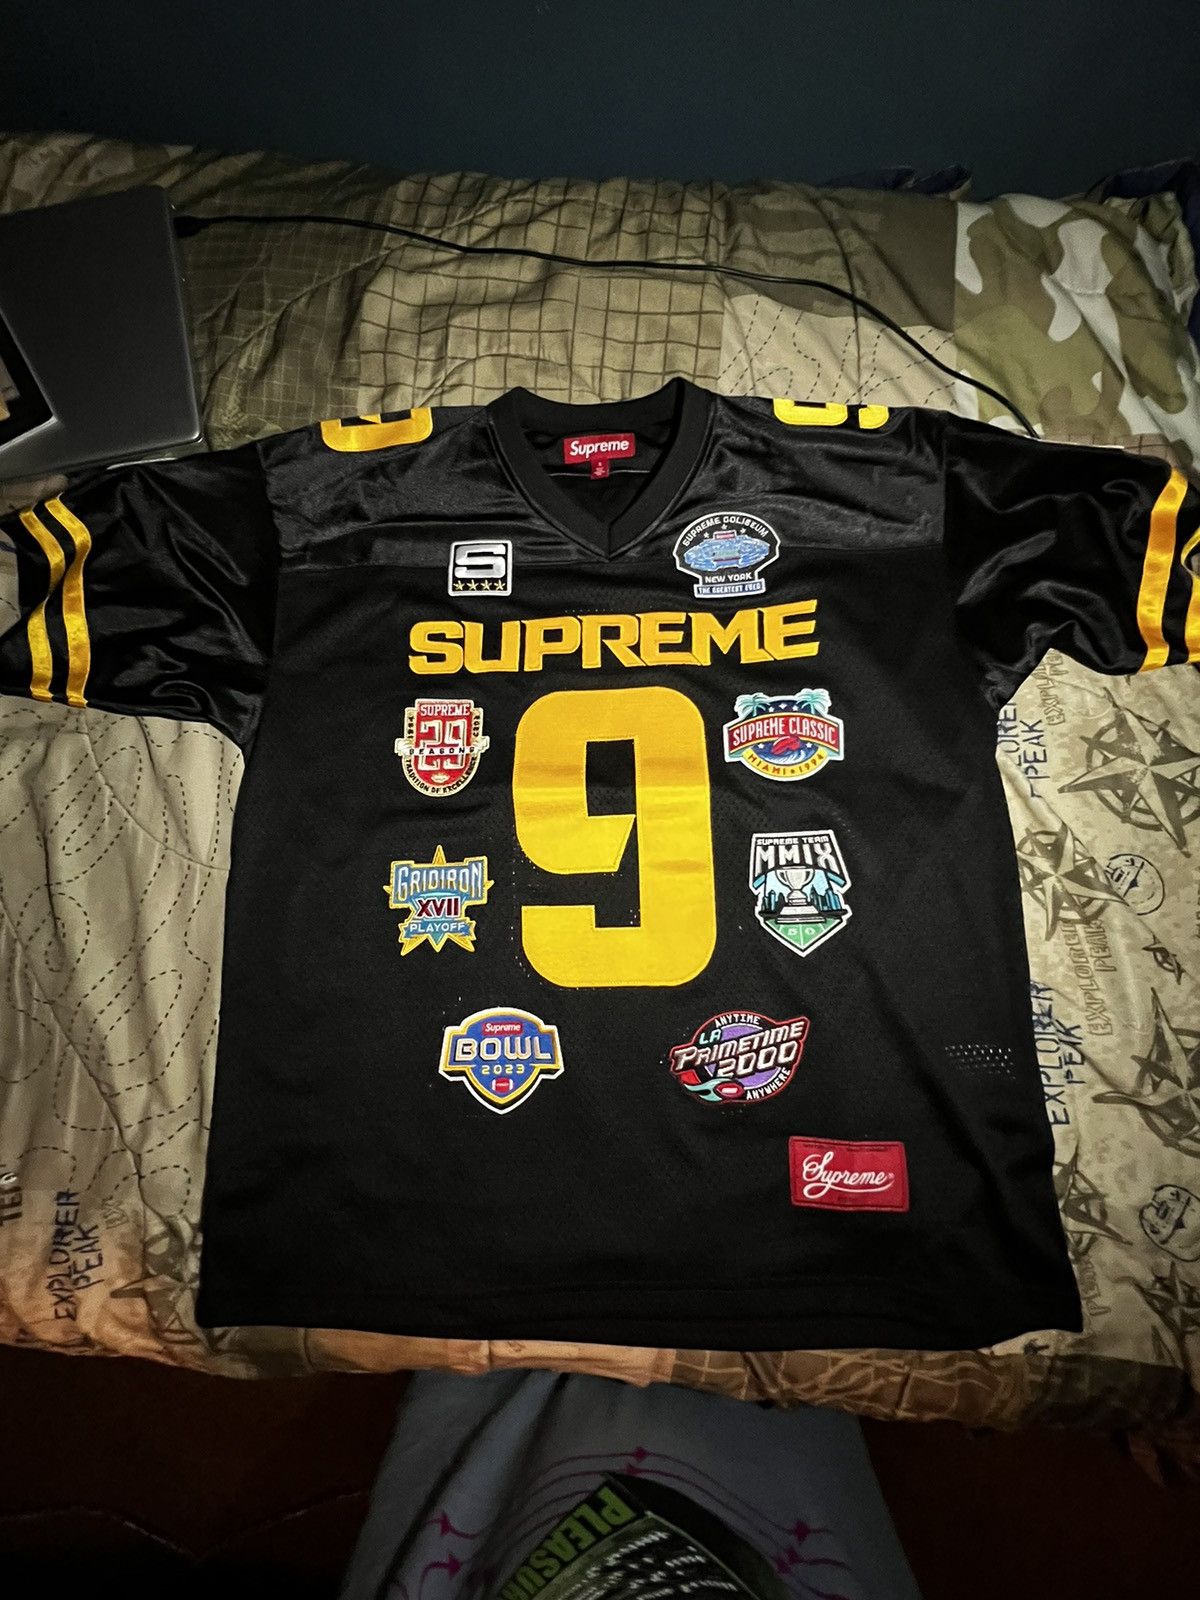 Supreme Supreme Championships Embroidered Football Jersey | Grailed